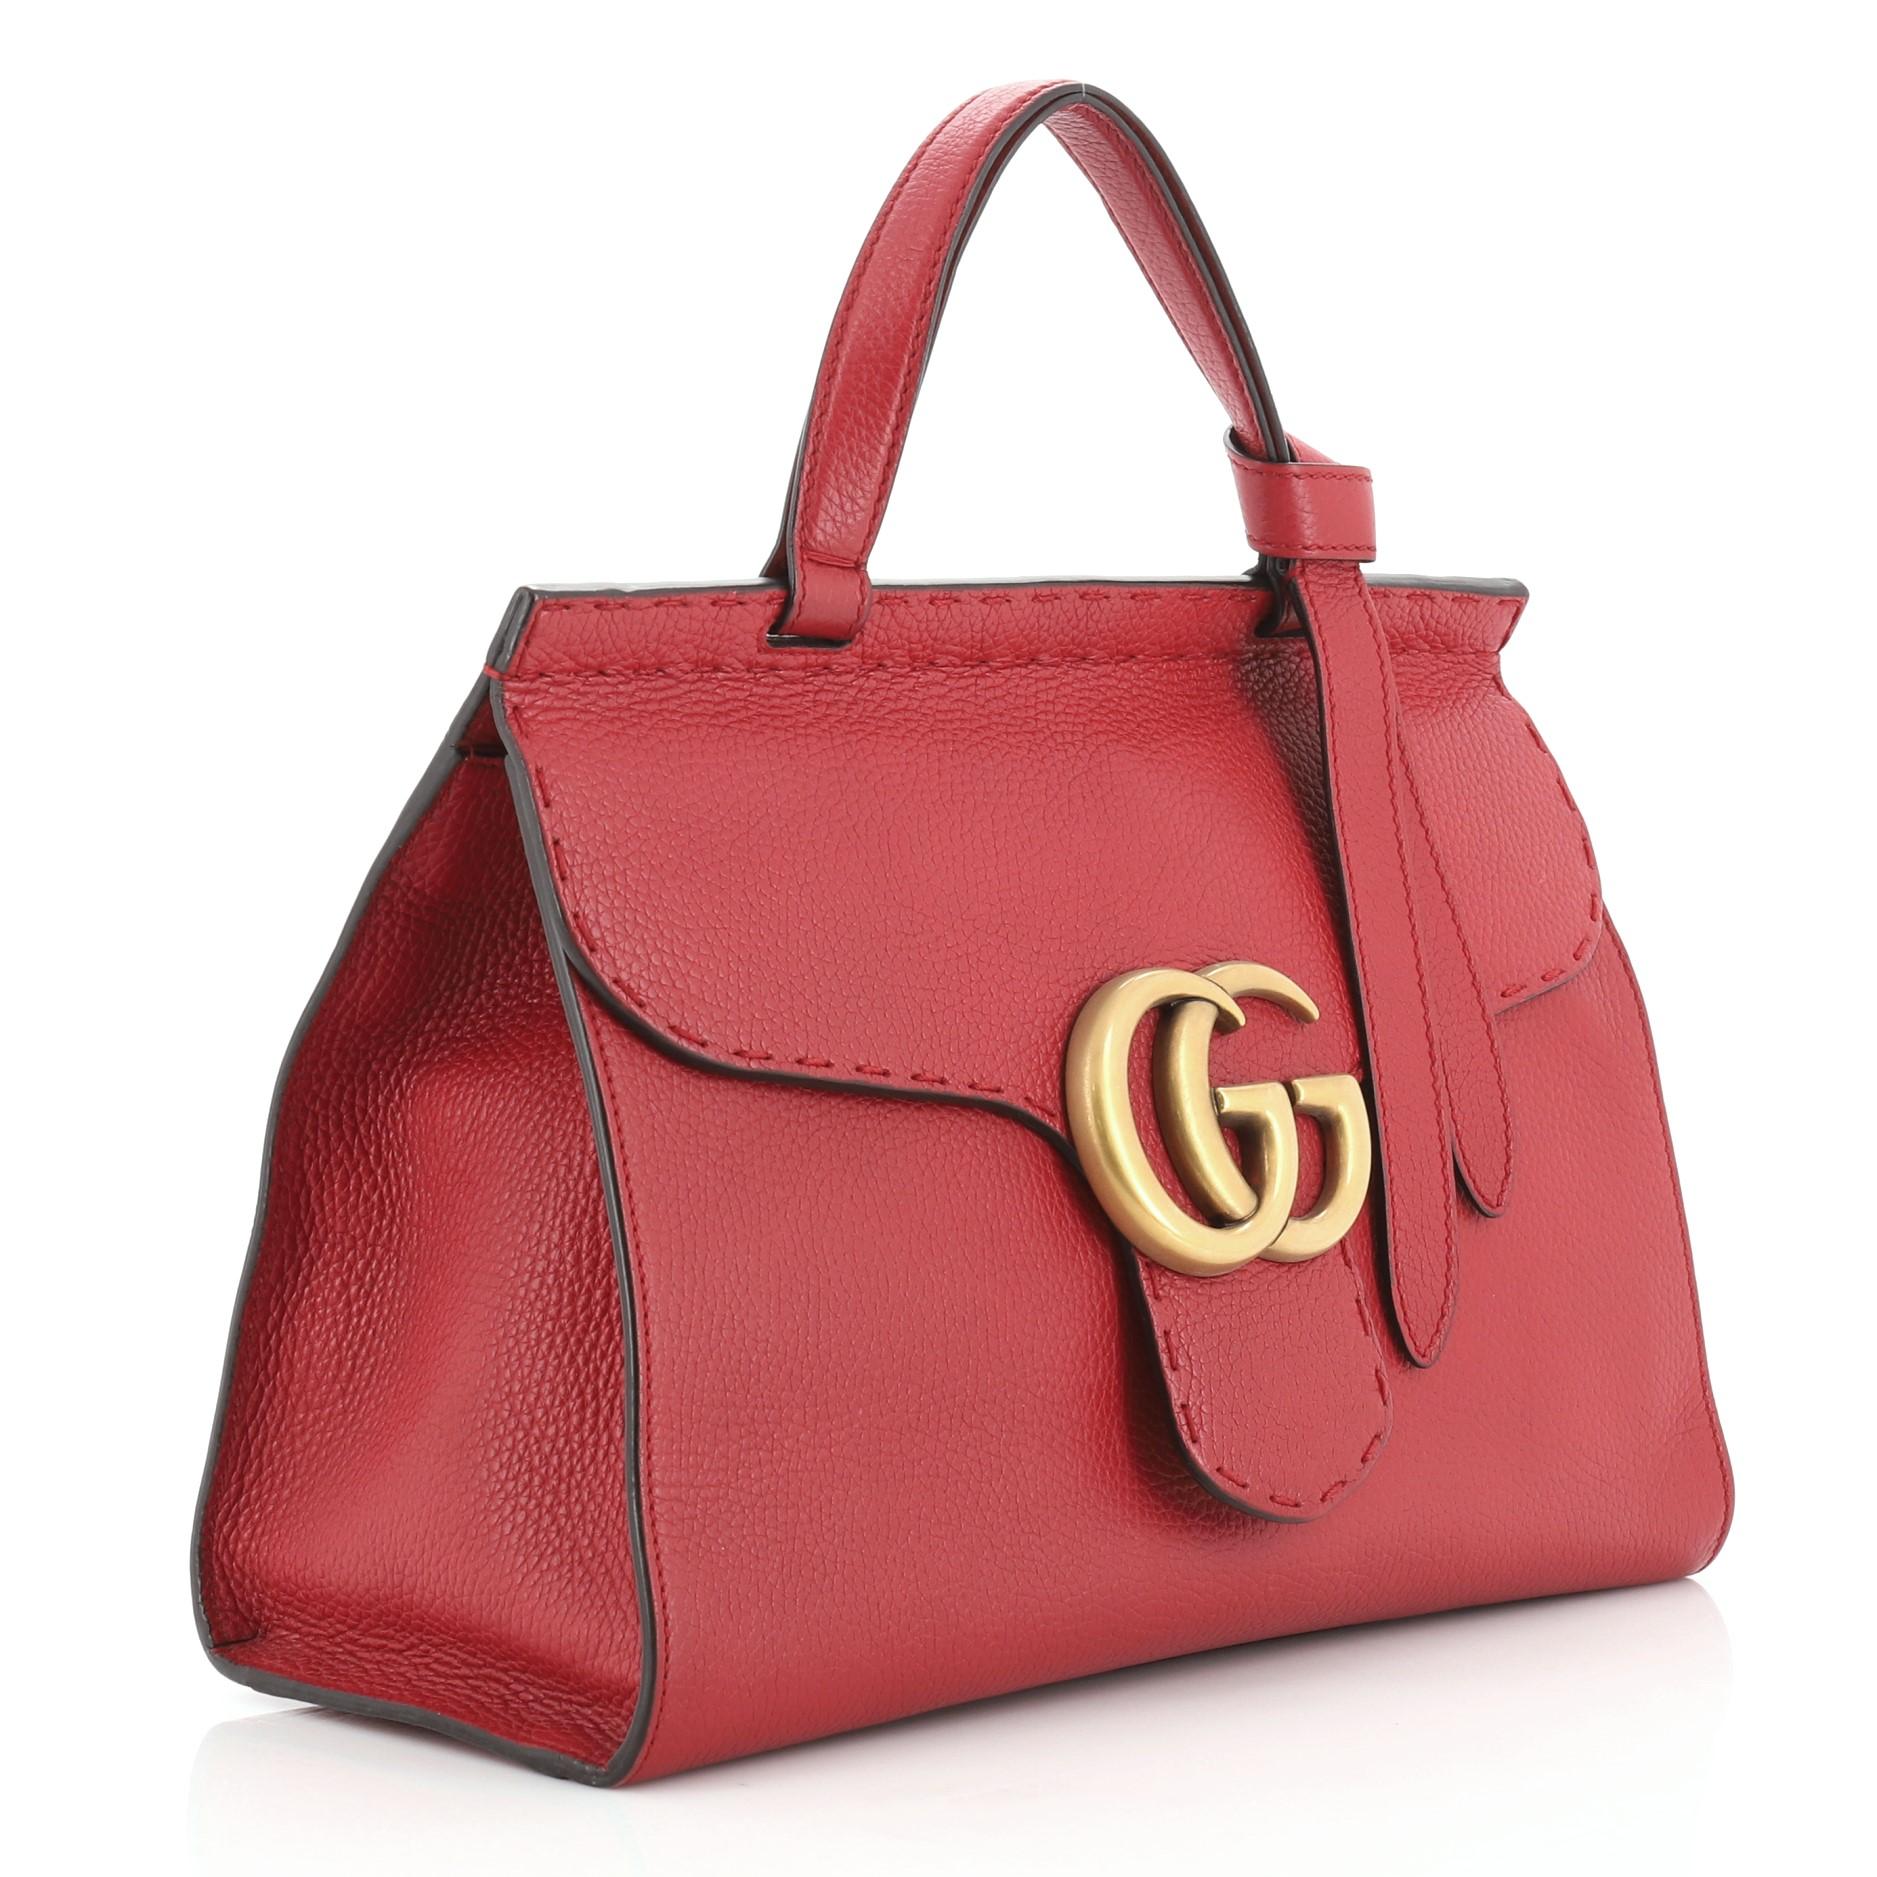 This Gucci GG Marmont Top Handle Bag Leather Small, crafted from red leather, features a flat leather handle, flap top with GG logo, and aged gold-tone hardware. Its push-lock closure opens to a neutral fabric interior with zip and slip pockets.